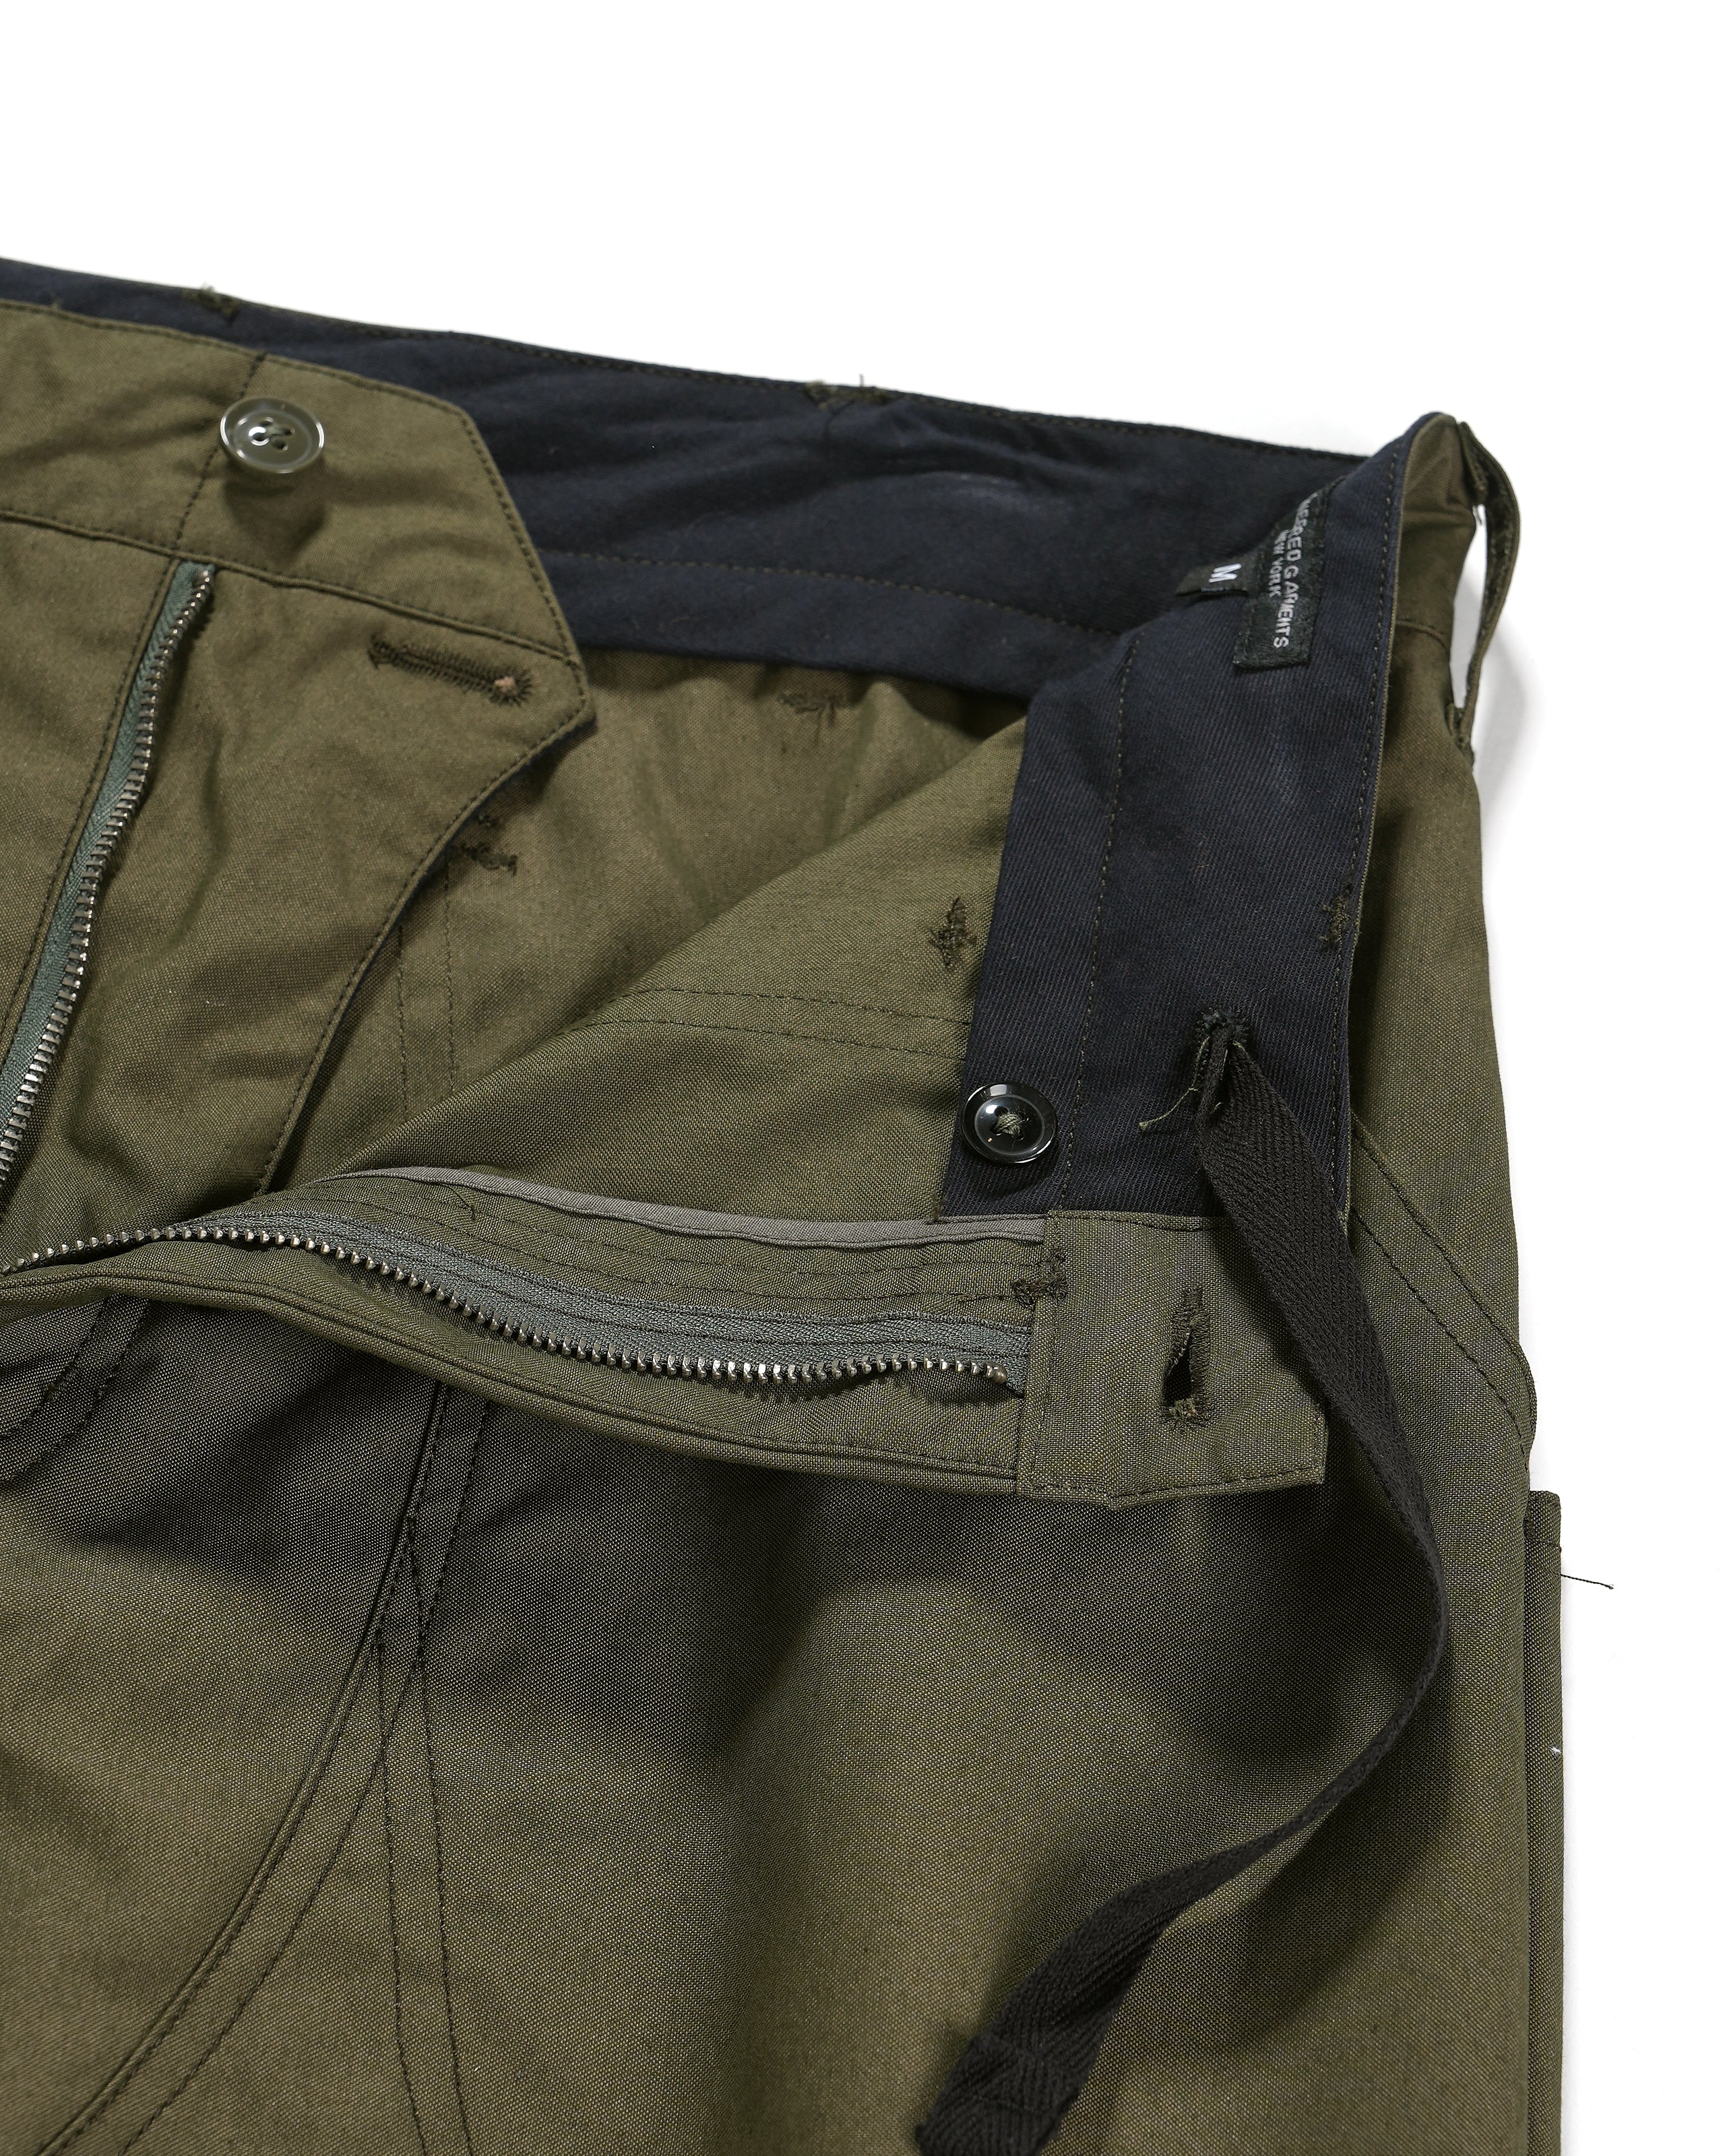 Climbing Pant - Olive CP Weather Poplin